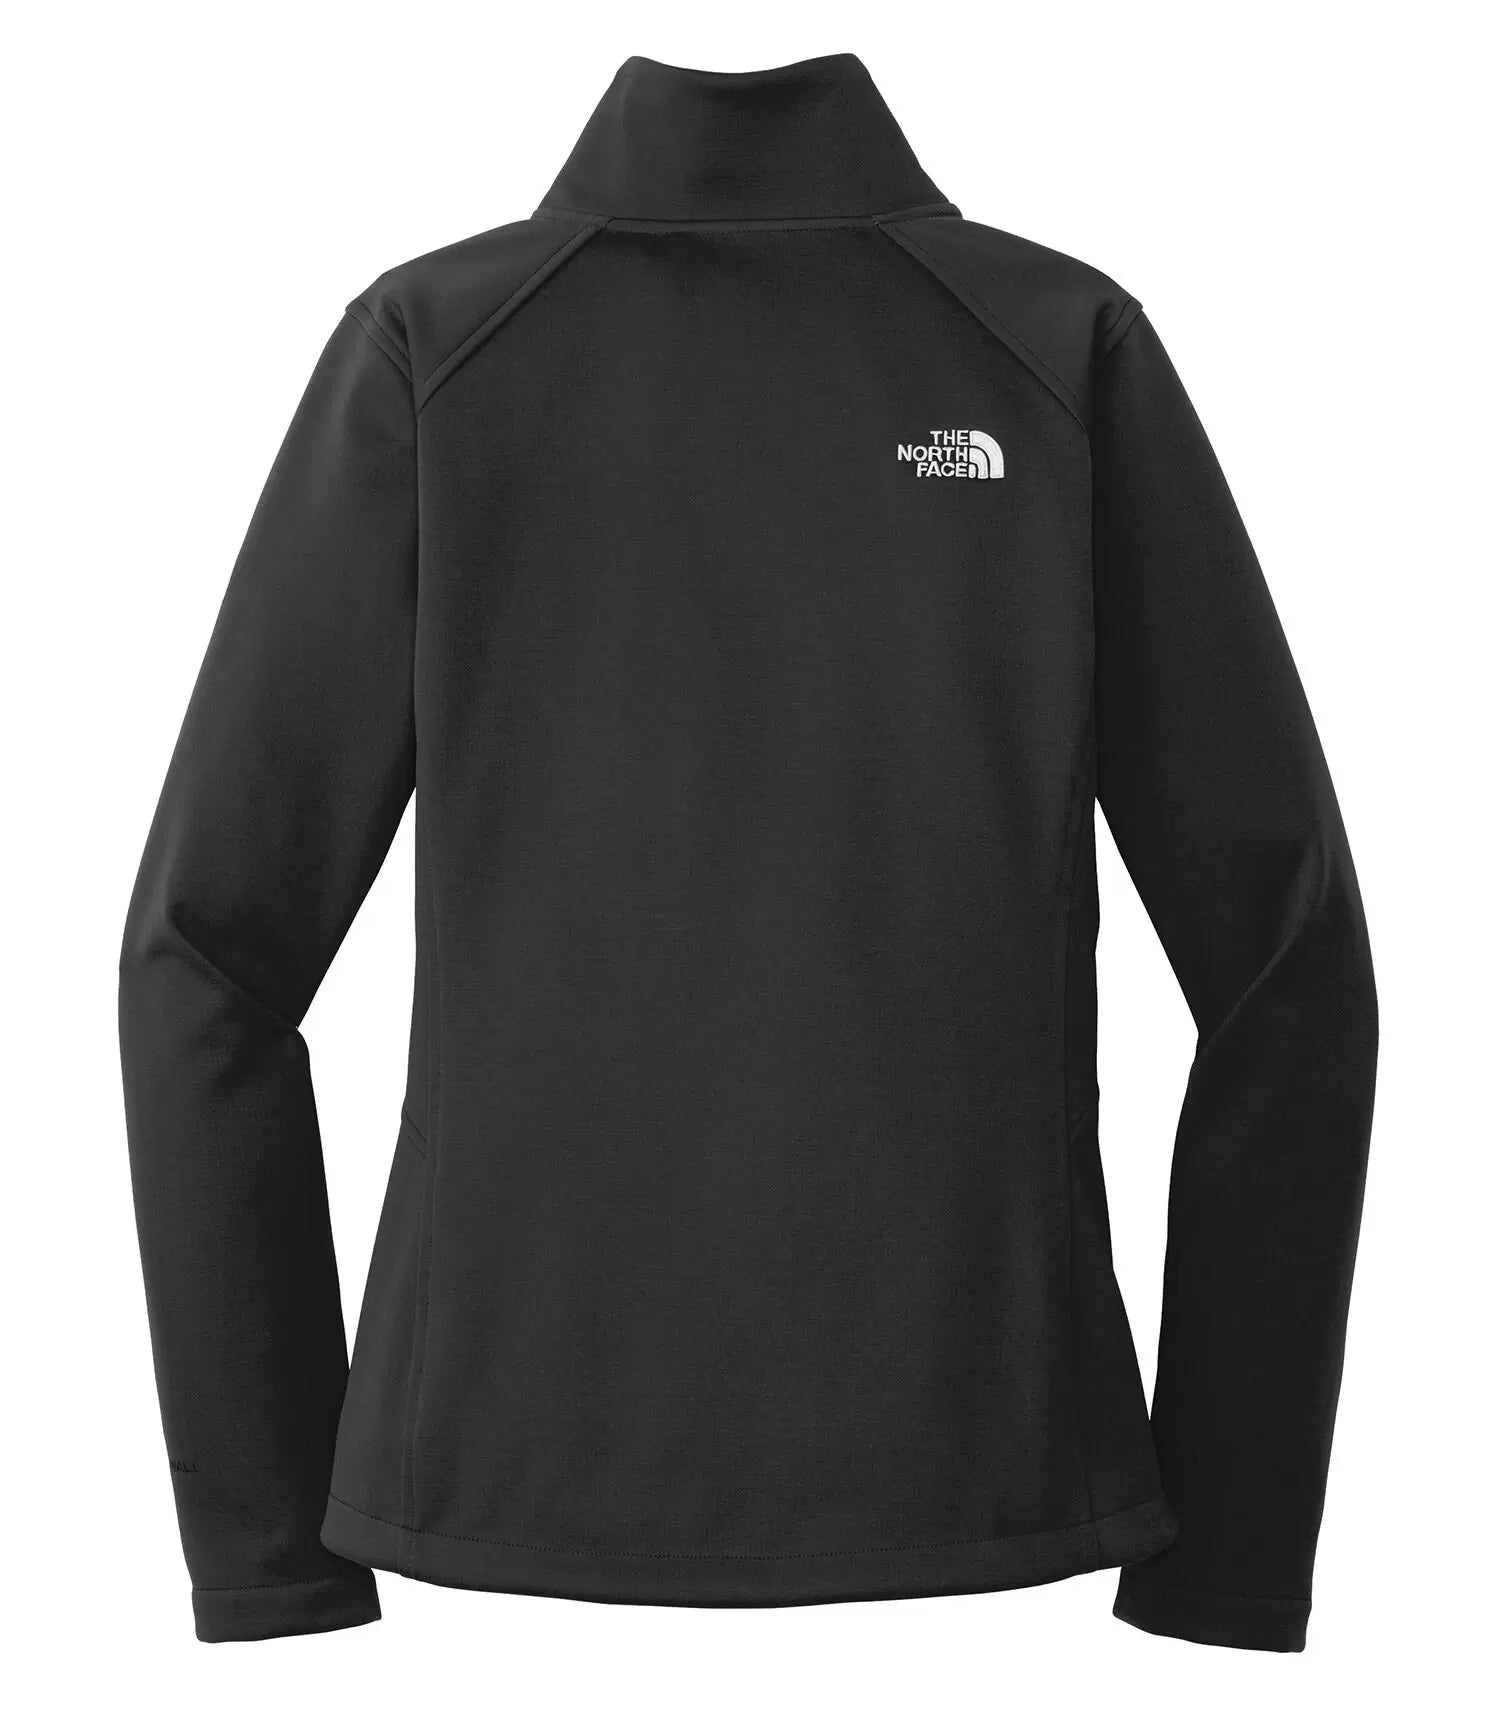 THE NORTH FACE® LADIES RIDGELINE SOFT SHELL JACKET